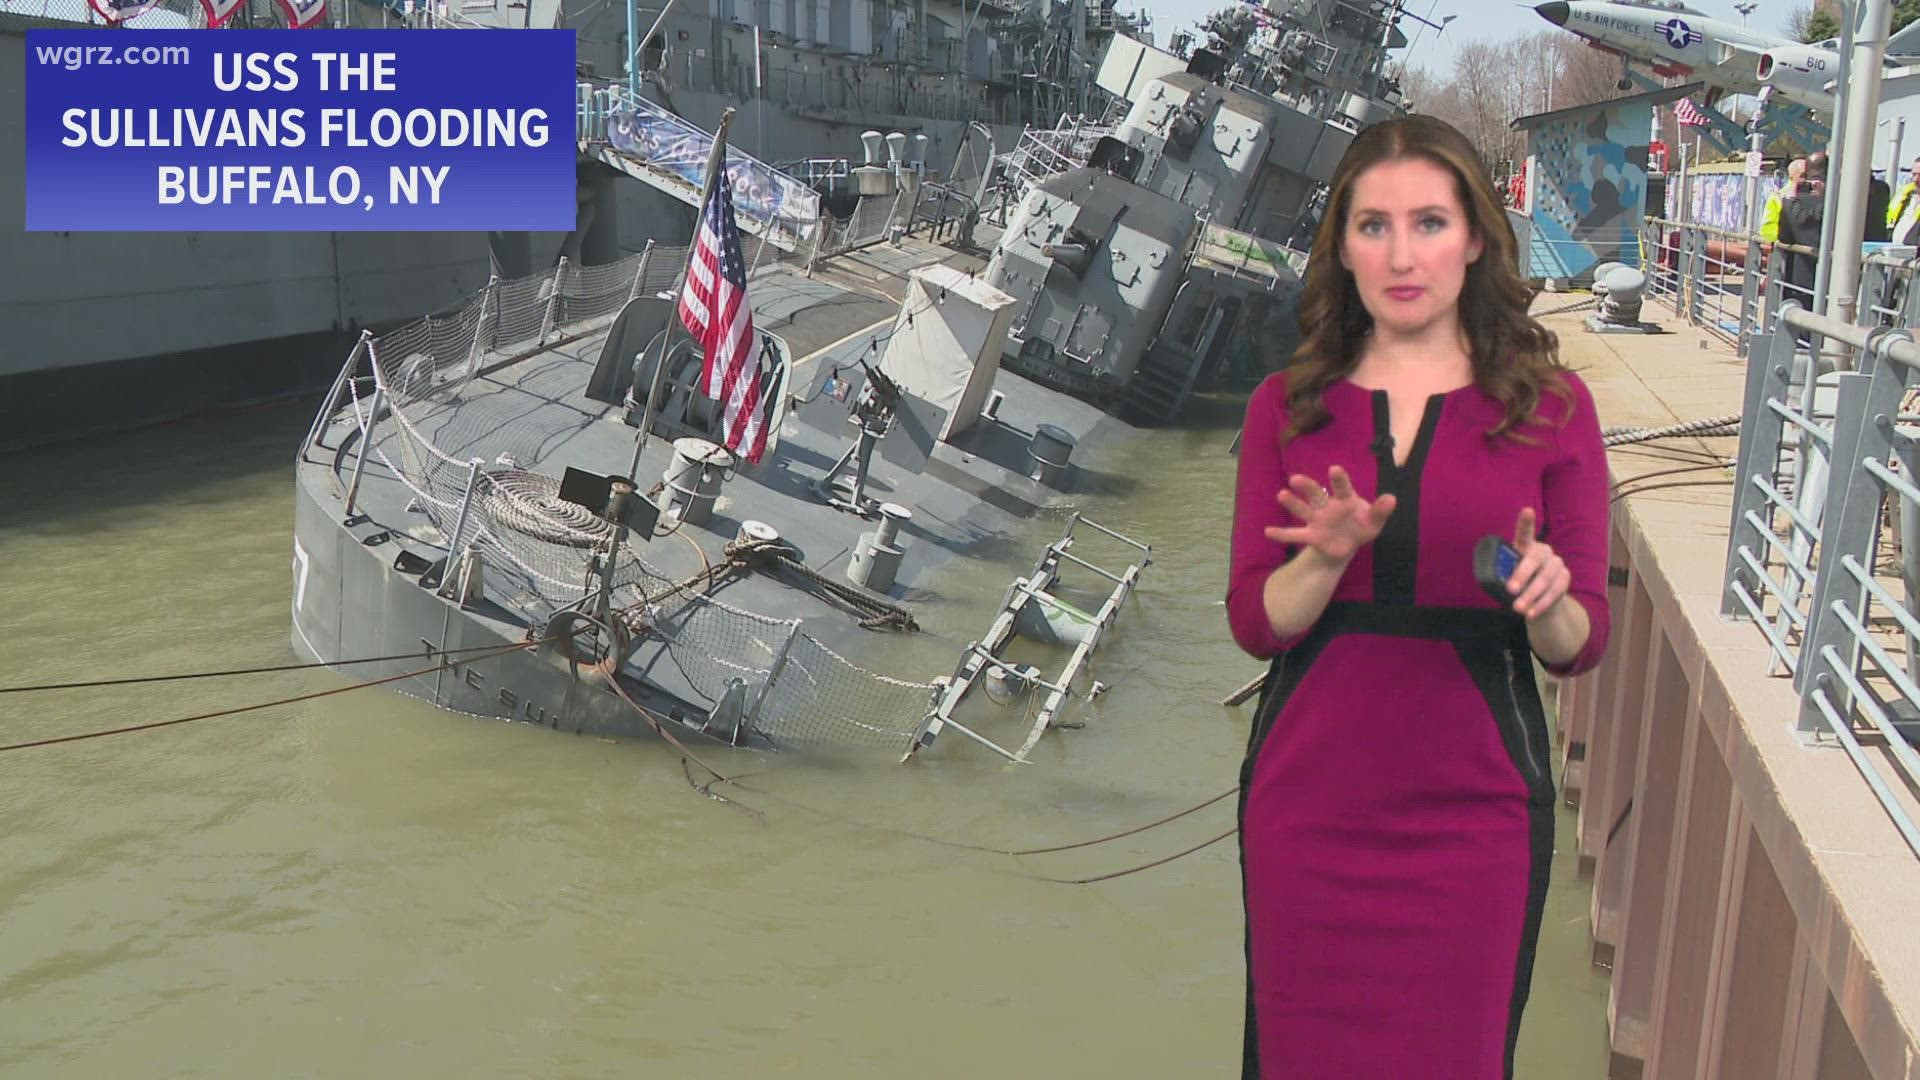 High winds are expected to pick up tomorrow while workers try to help save the sinking naval ship which may possibly affect workers.